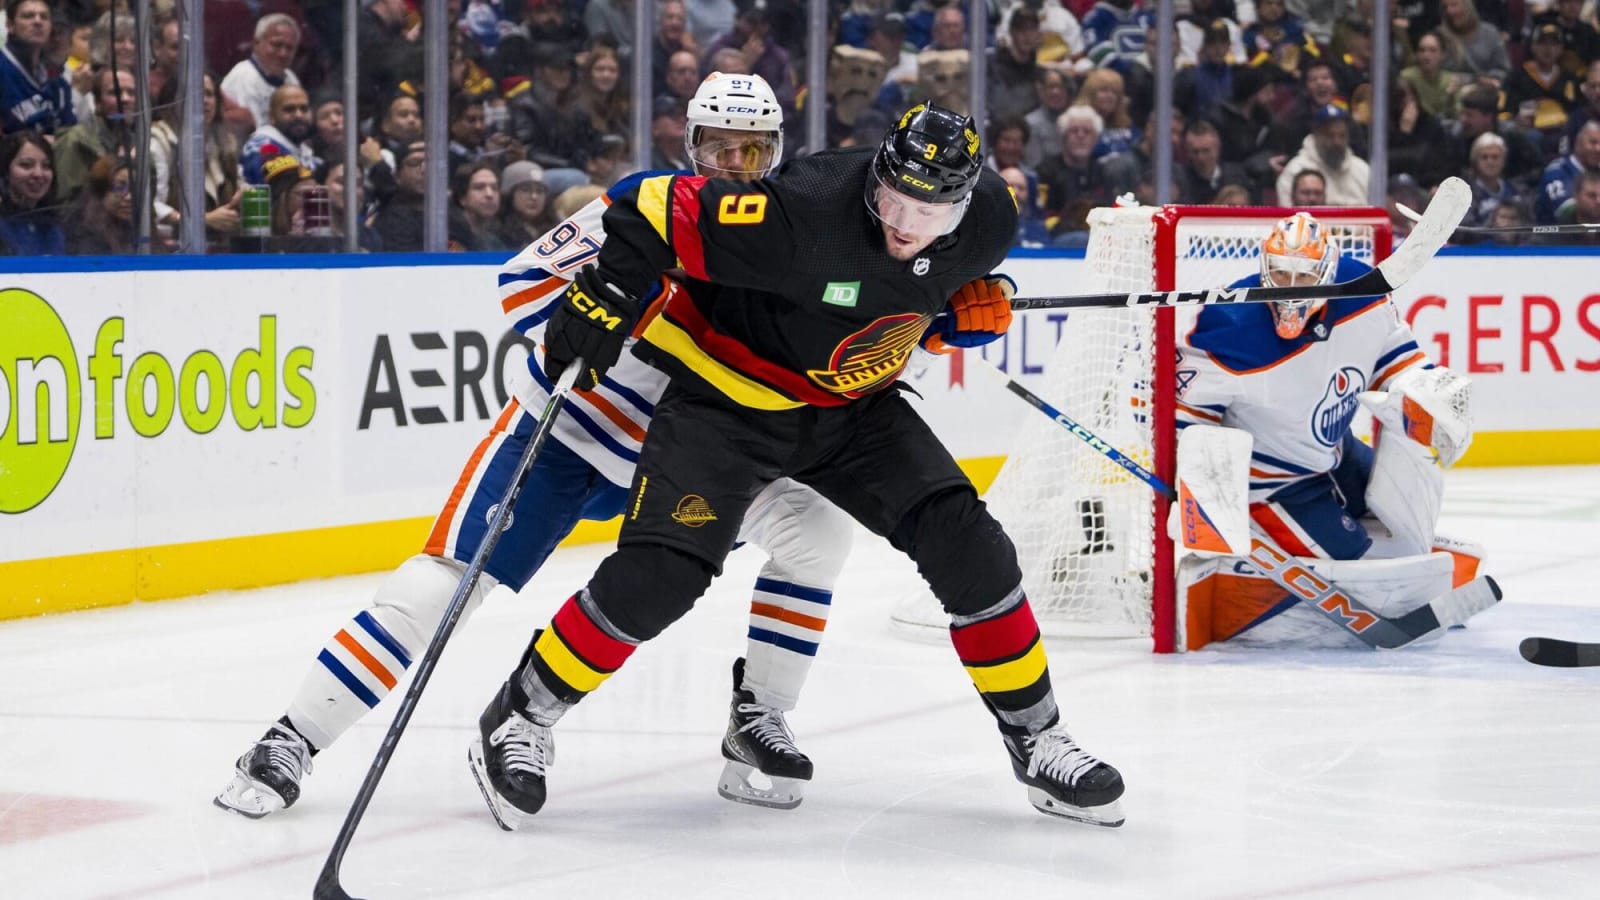 Where the Vancouver Canucks have an advantage over the Edmonton Oilers